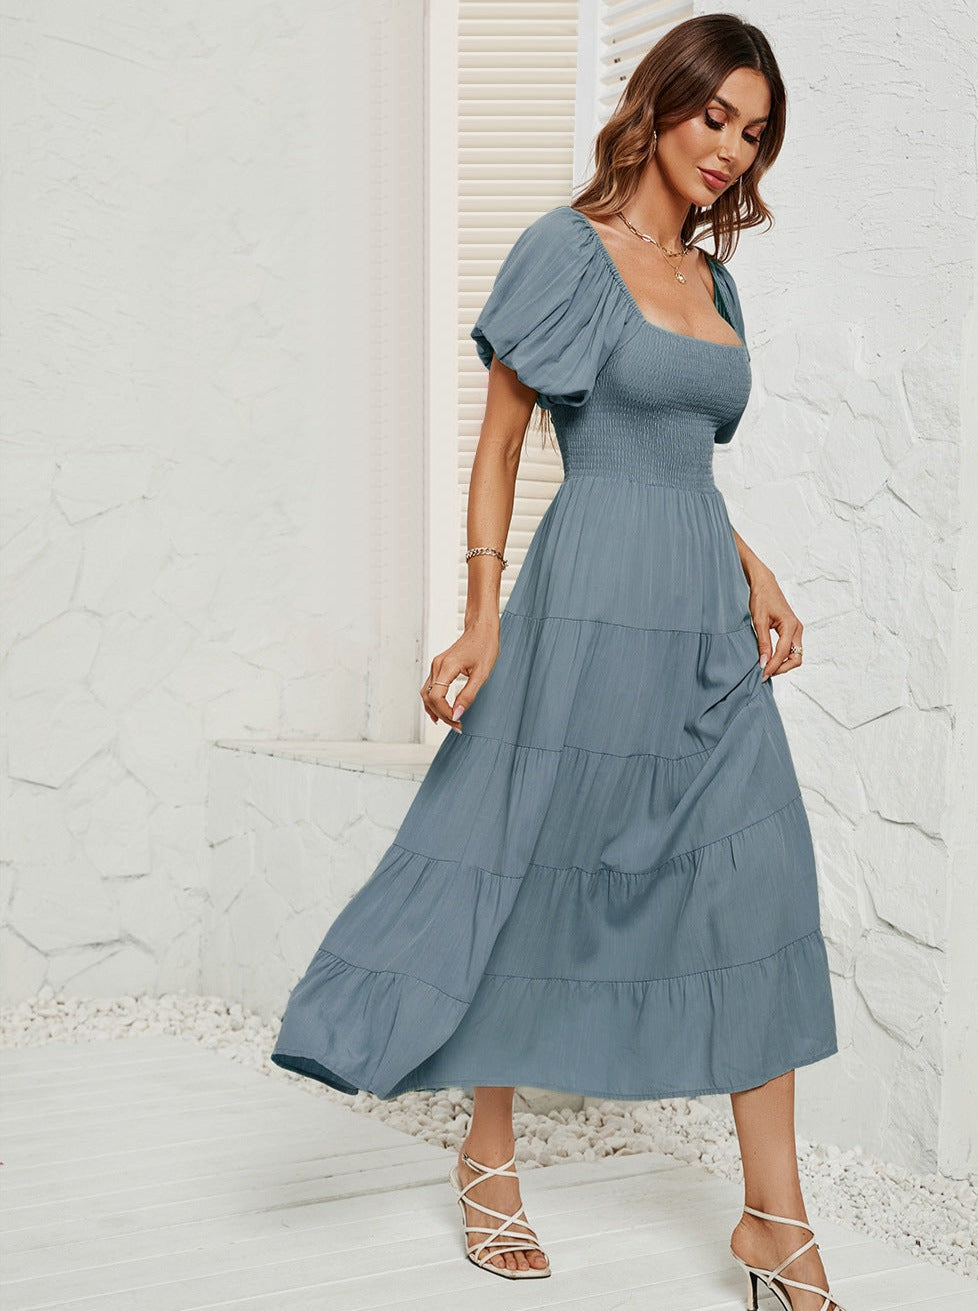 Grey and Blue High Waist Bubble Sleeve Square Neck Maxi Dress